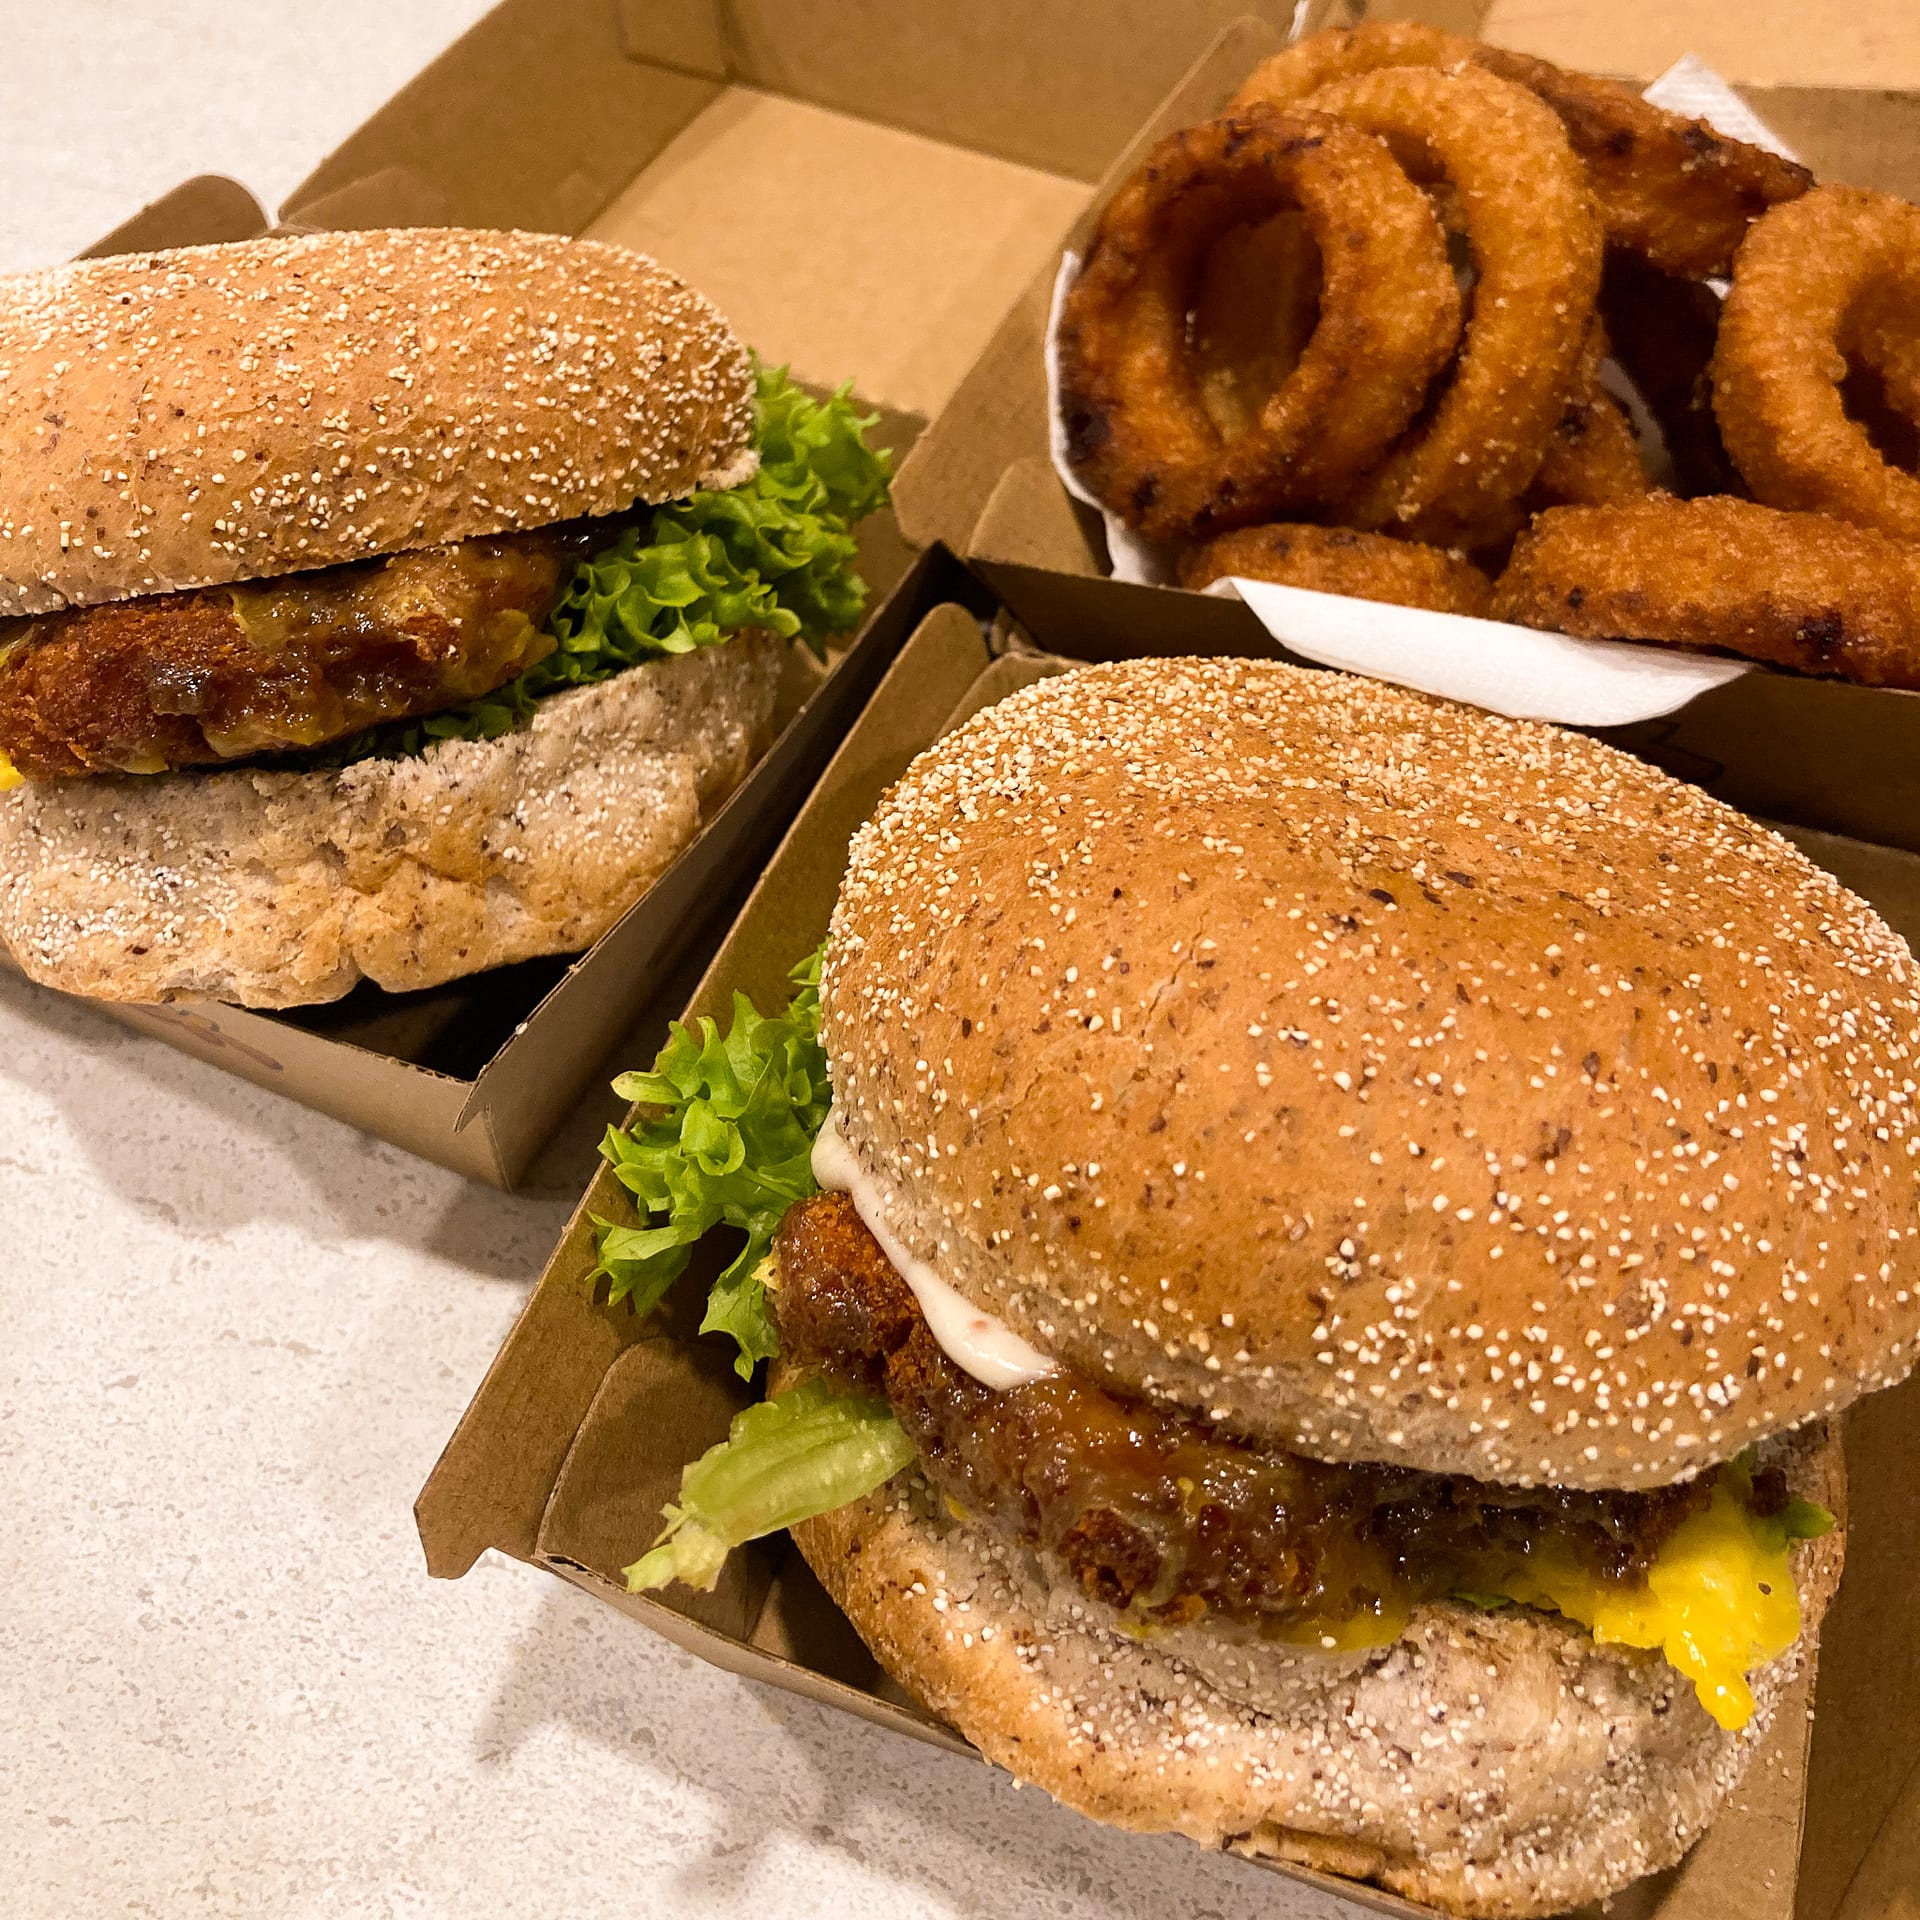 Two burgers from Slick burger and onion rings Christchurch